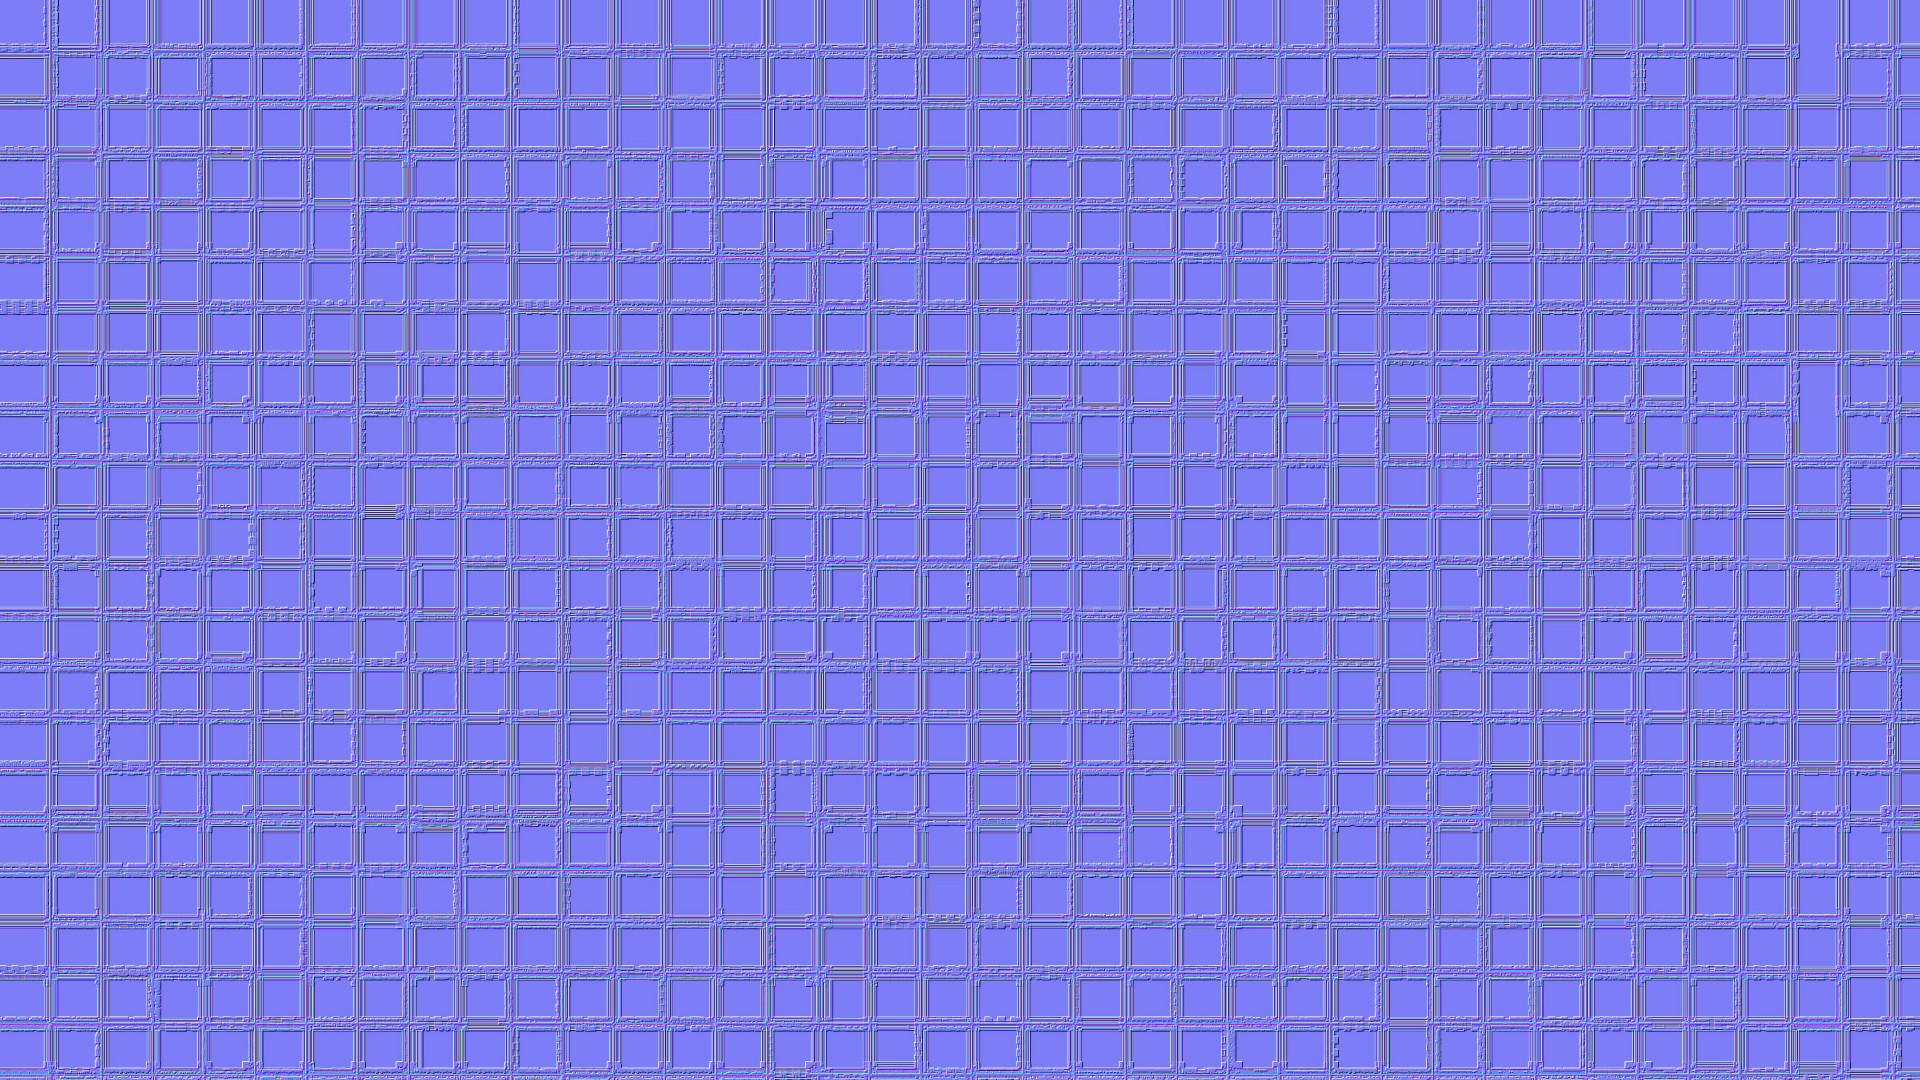 lilac squared wallpaper background lilac design free photo